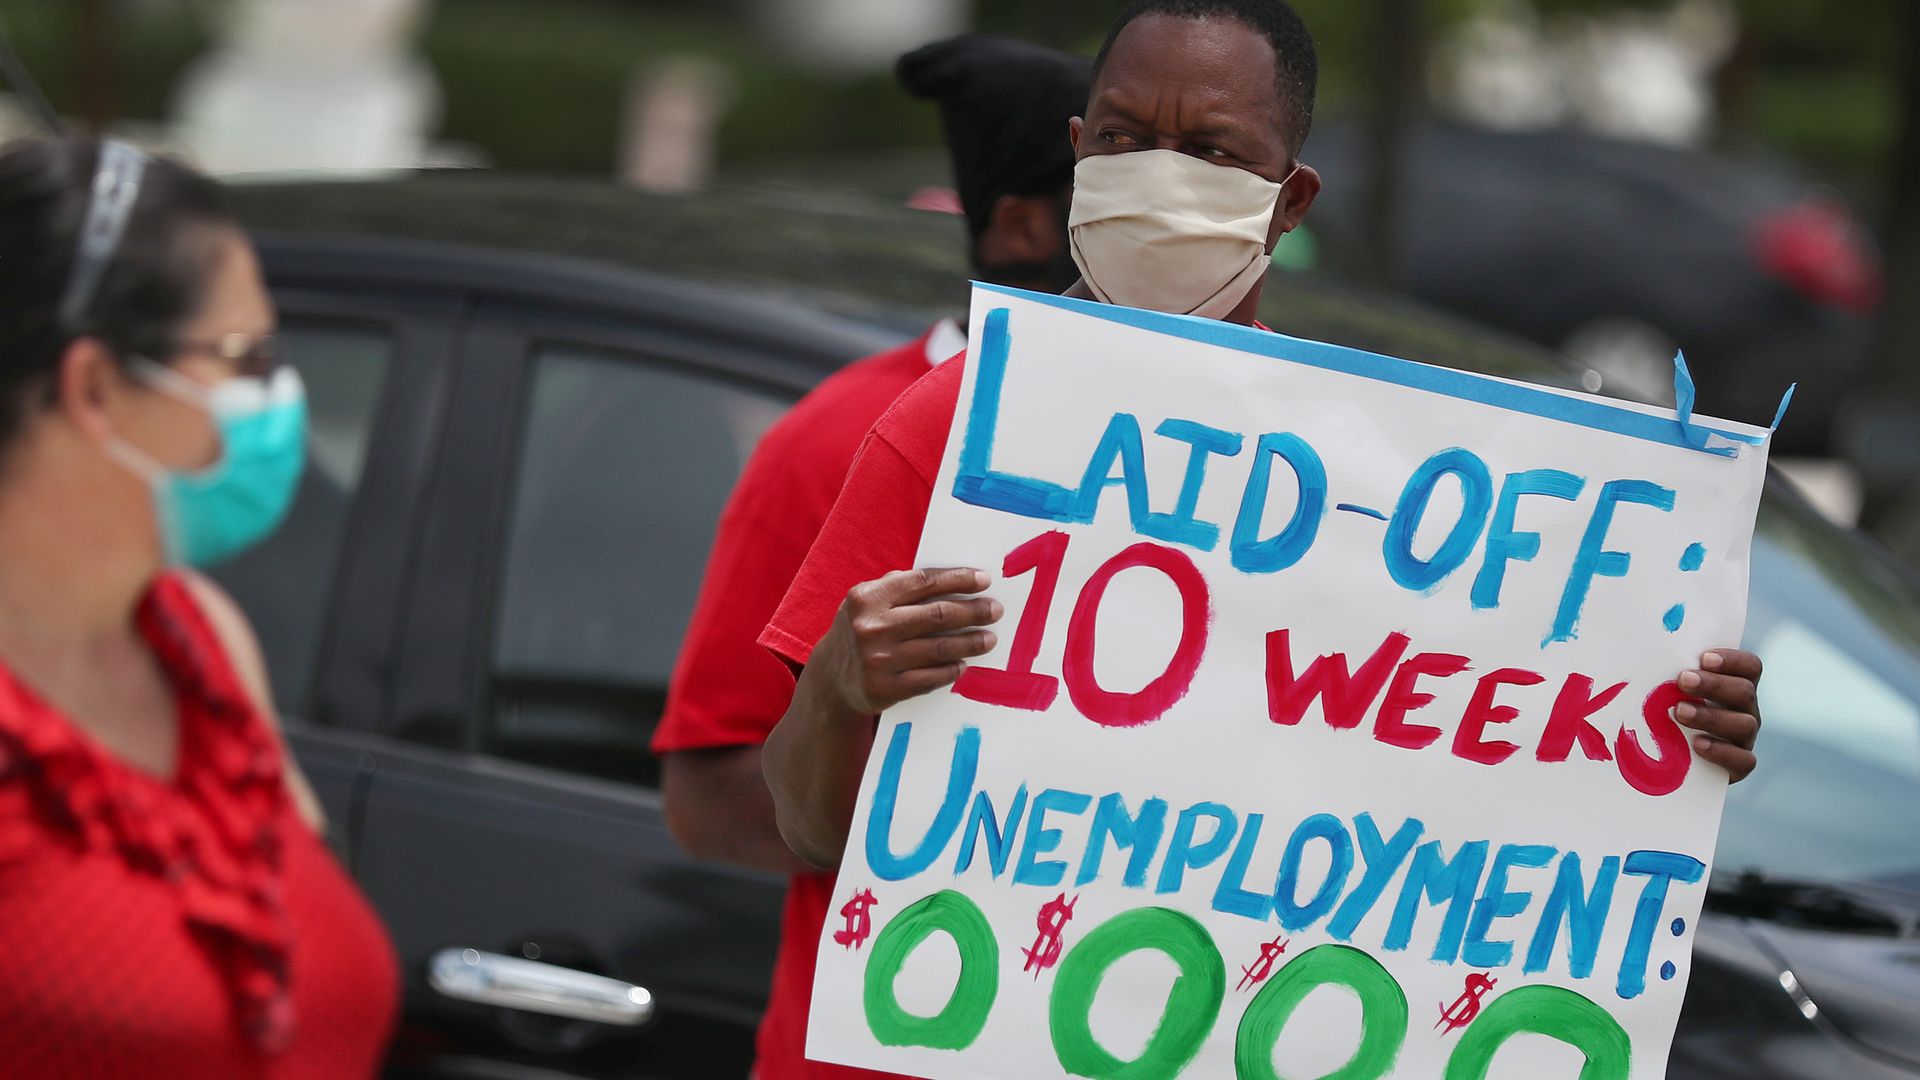 Protester holding a sign asking the state of Florida to fix its unemployment system on May 22, 2020 in Miami Beach, Florida